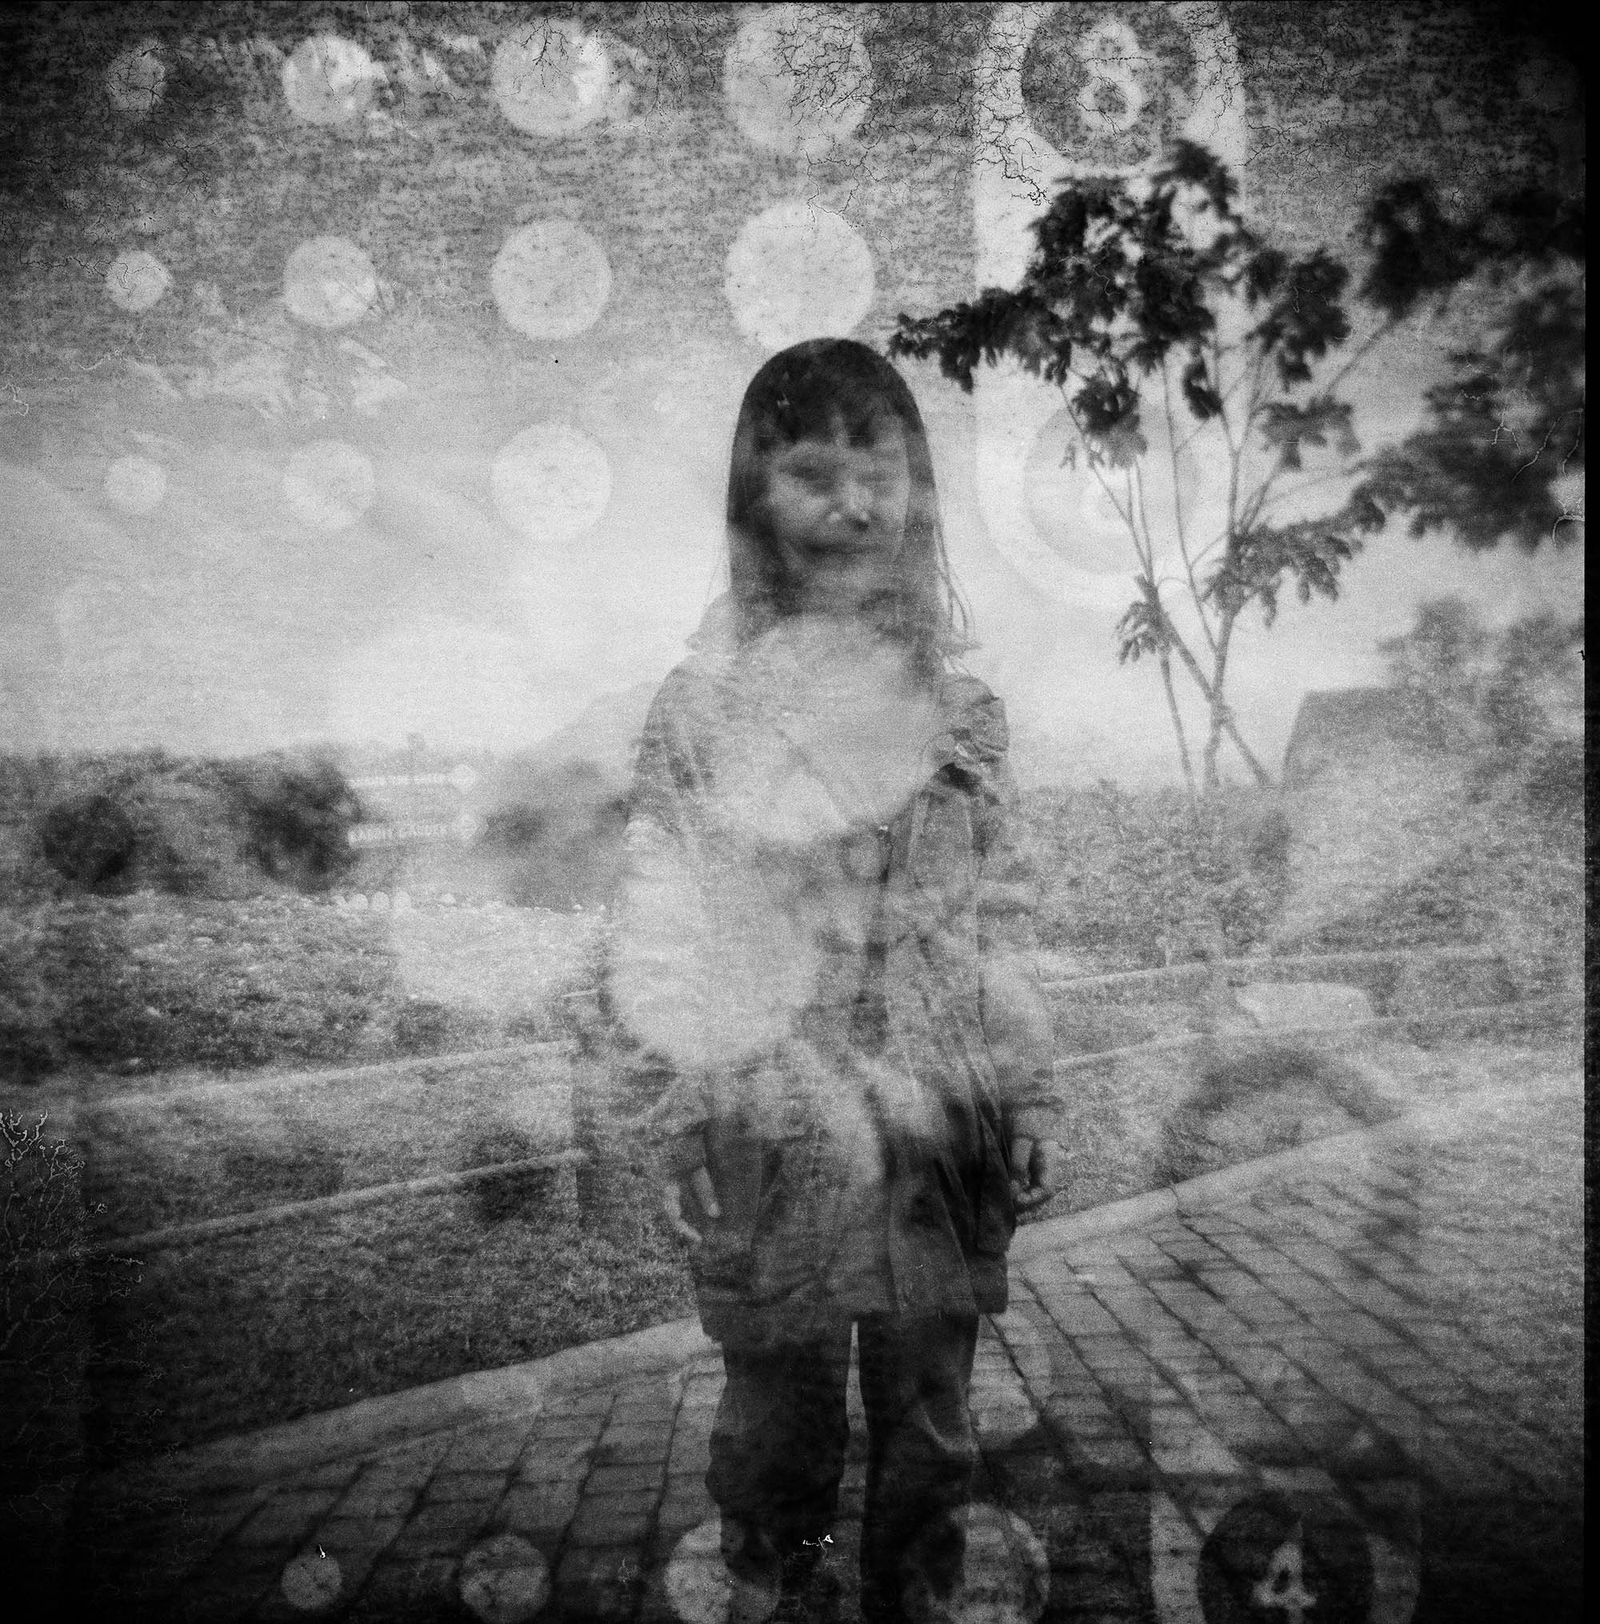 © idealita ismanto - Image from the Short Term Memories photography project